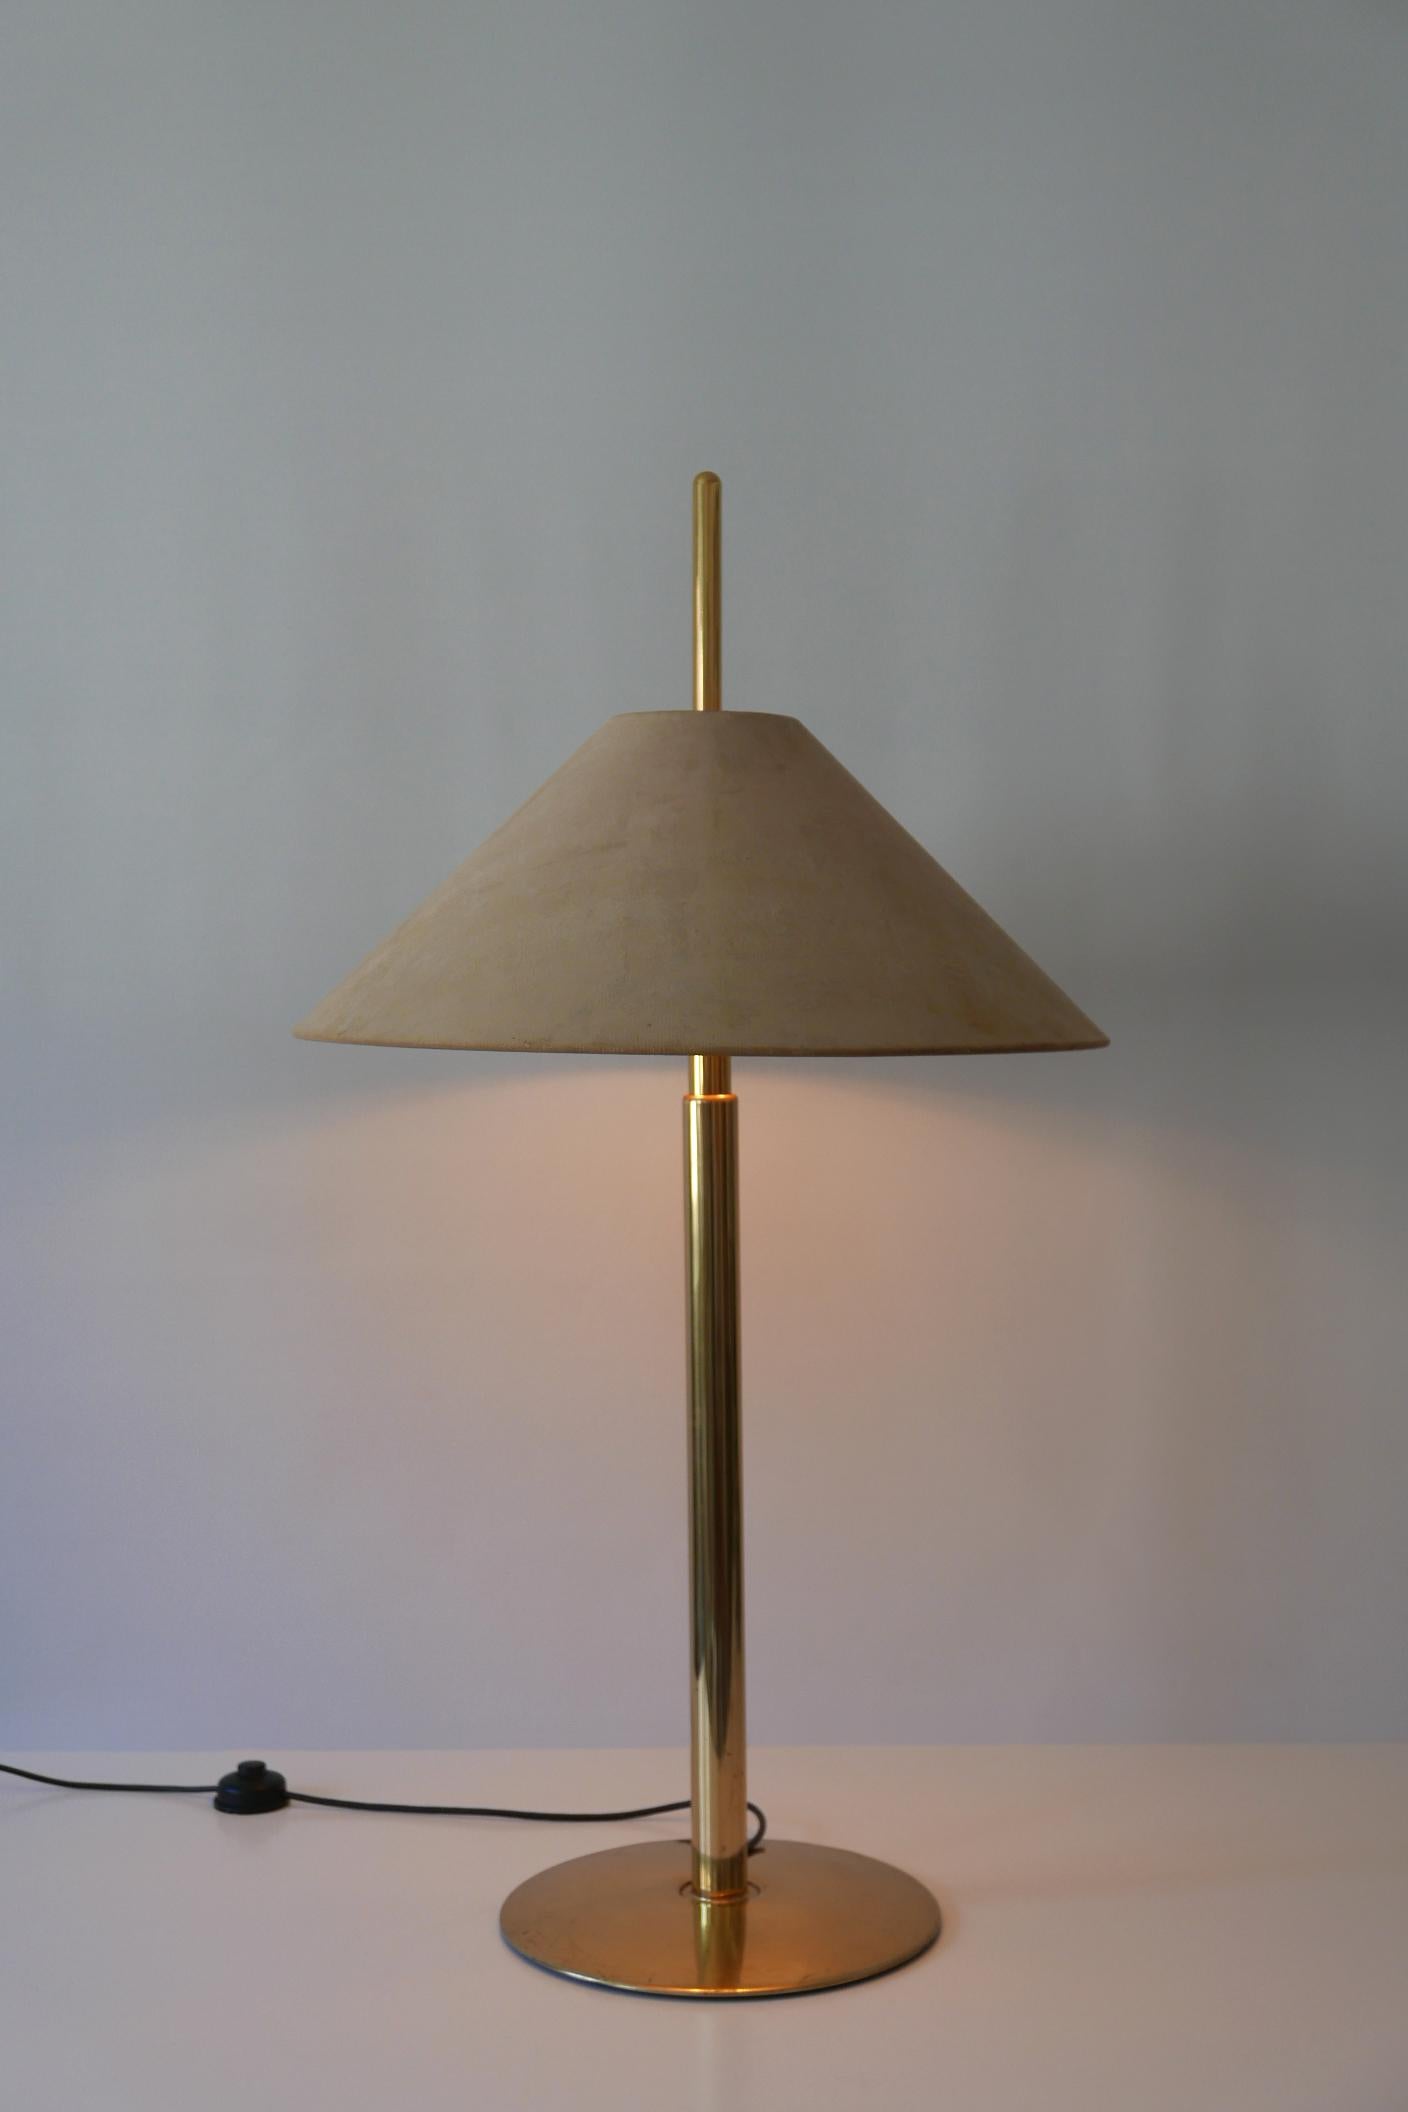 Polished Extremely Rare Telescopic Brass Floor Lamp by Ingo Maurer for Design M 1970s